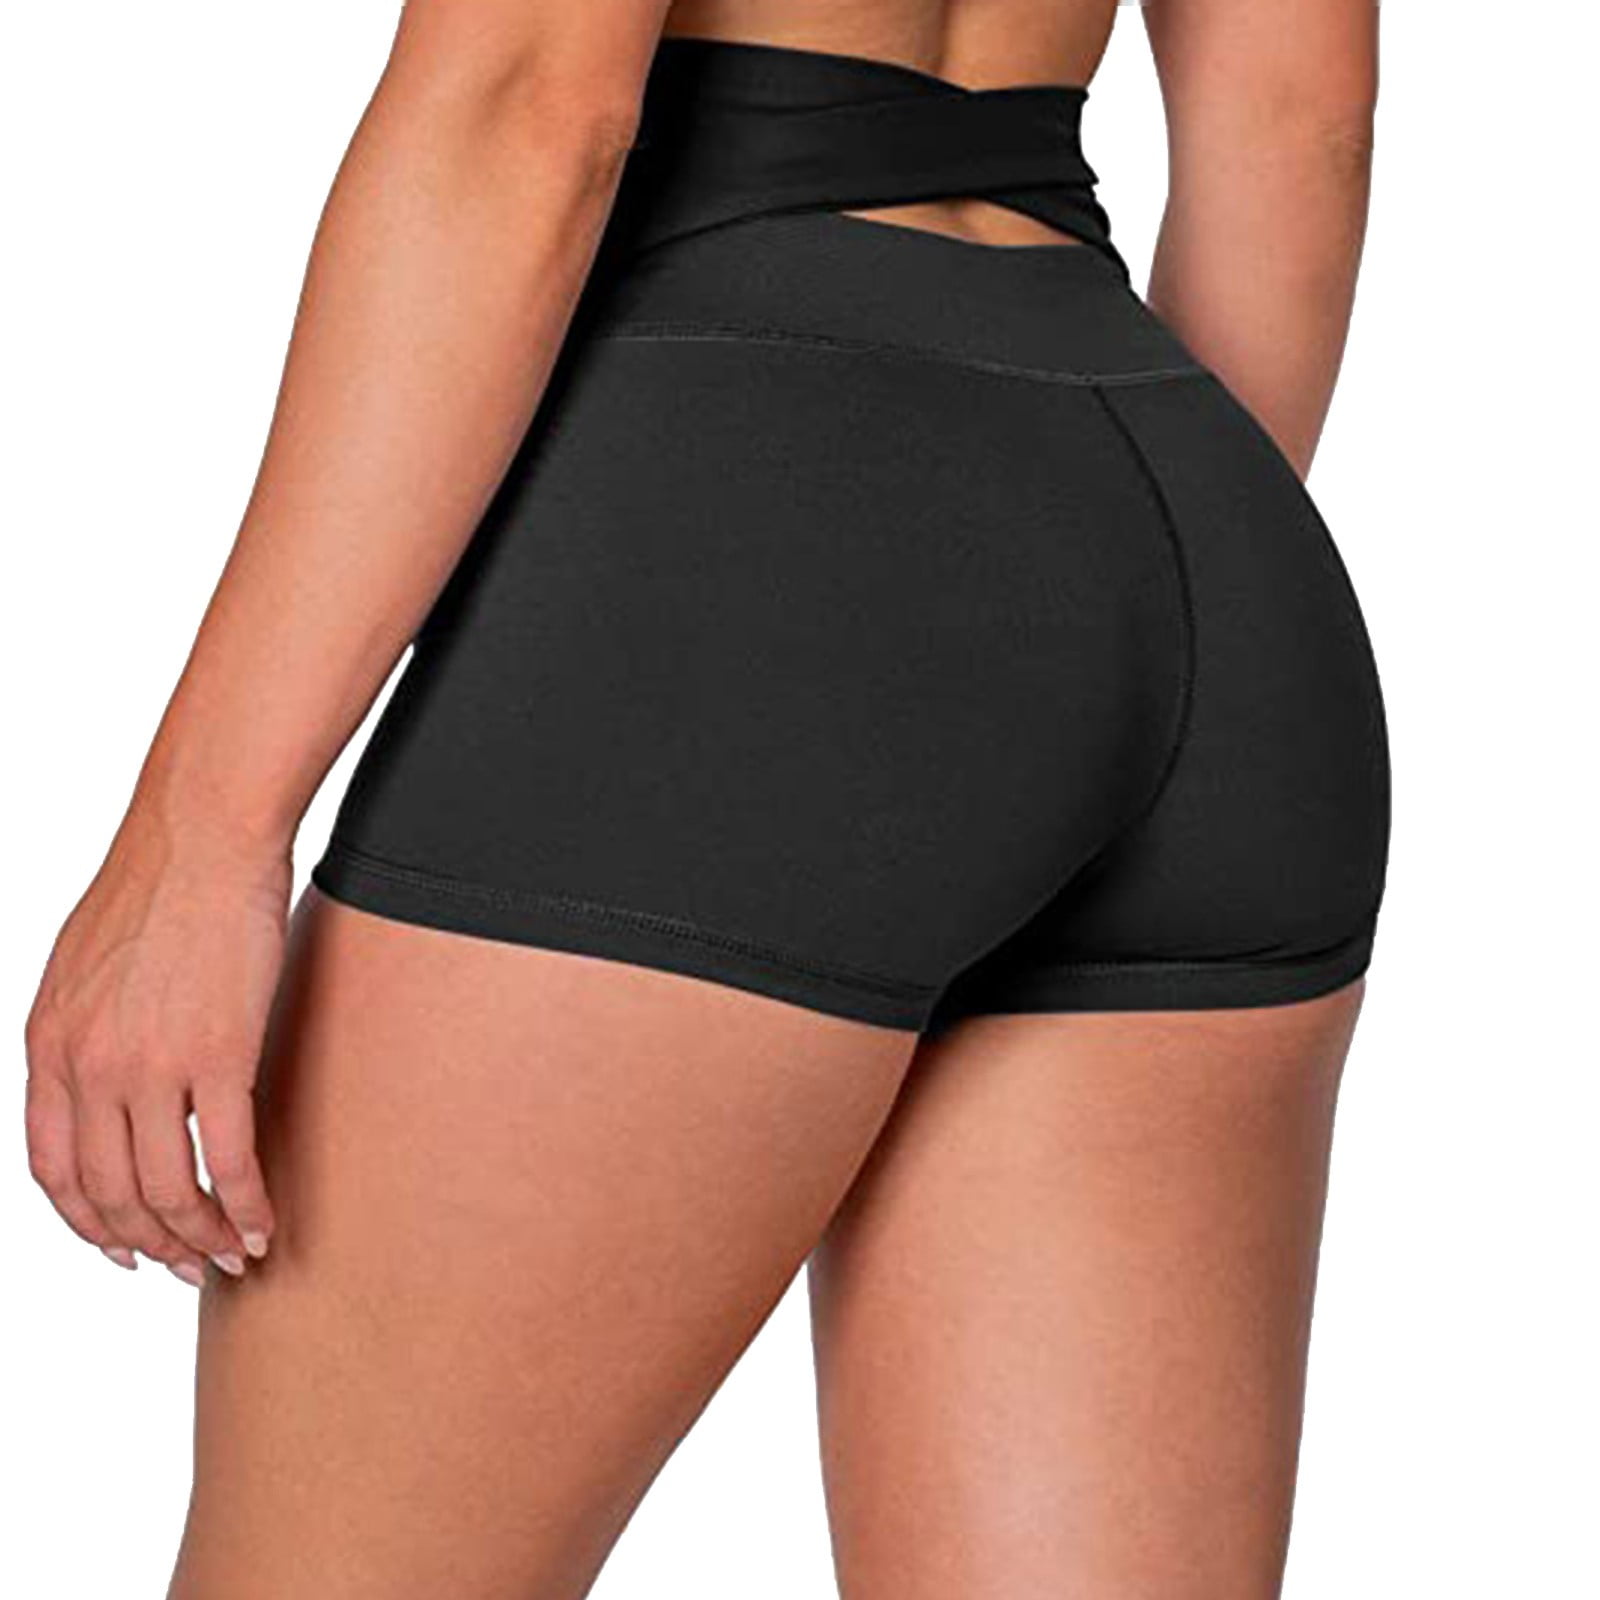 Baocc Yoga Shorts Women's Back Waist Strap High Waist Tight Fitness Solid  Color Stretch Yoga Pants Shorts for Women Black